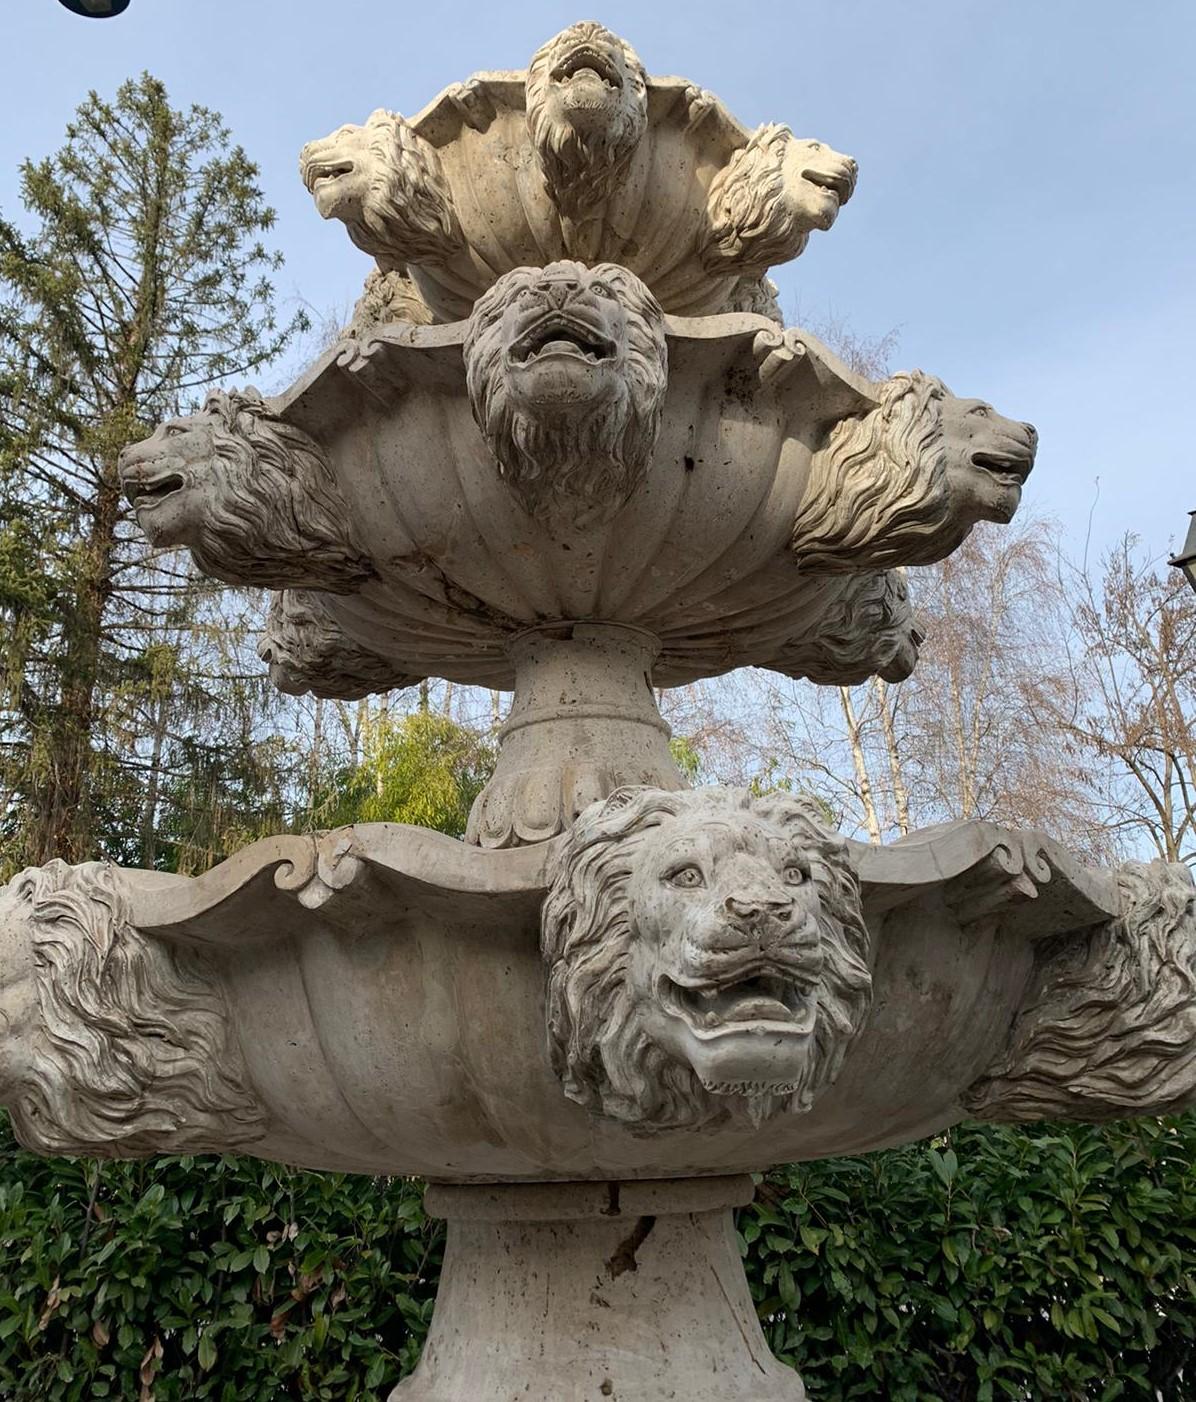 Large fountain in Travertine stone, imposing and richly carved with rampant horses, lion faces and three raised basins above the base on a central column also sculpted, built and sculpted by hand in the 1980s in Italy.
Consisting of three basins